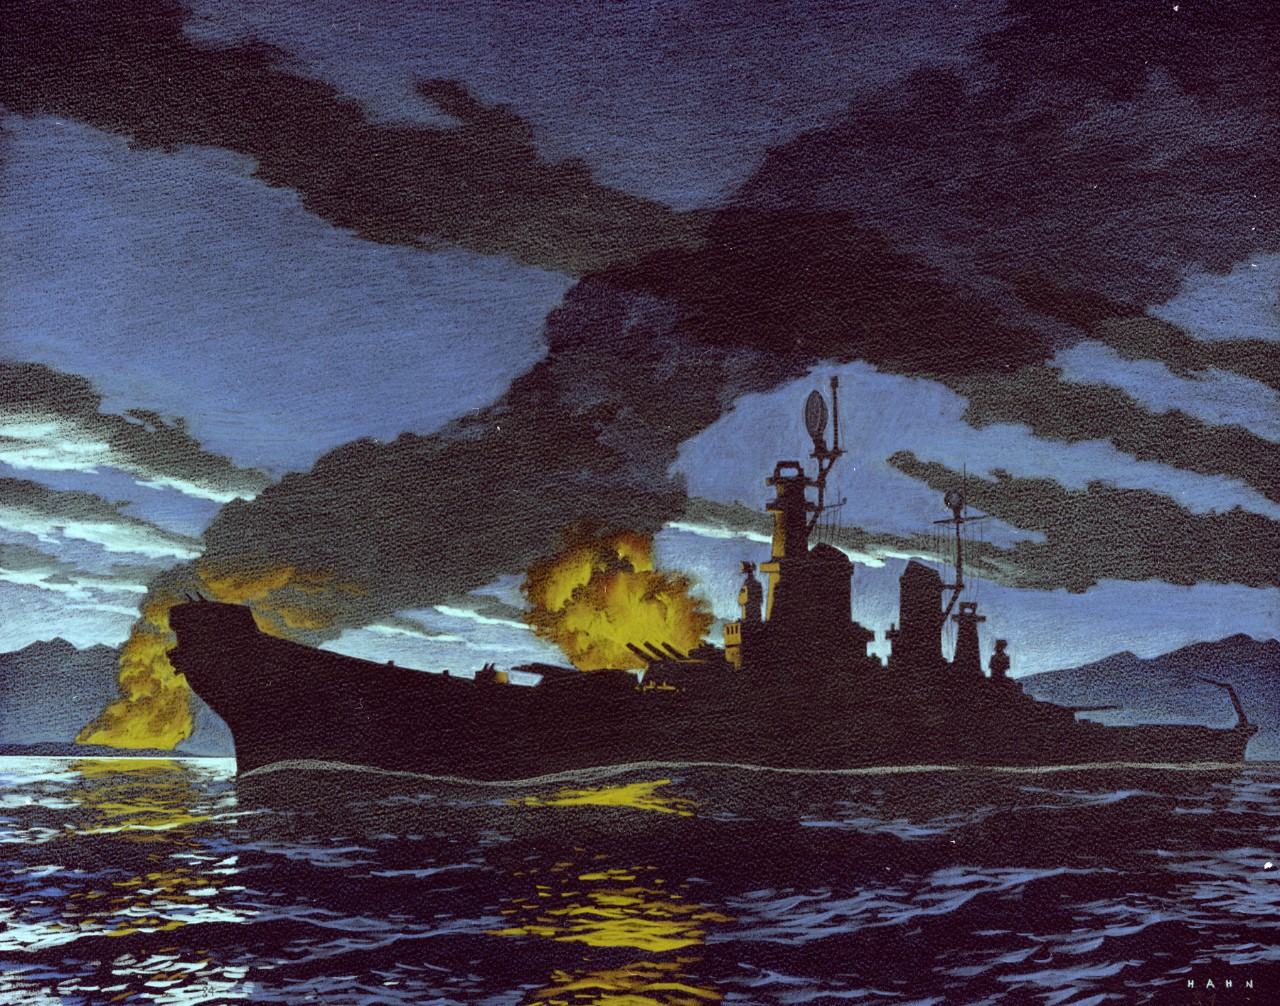 A battleship in the foreground with an explosion on a hill side in the background